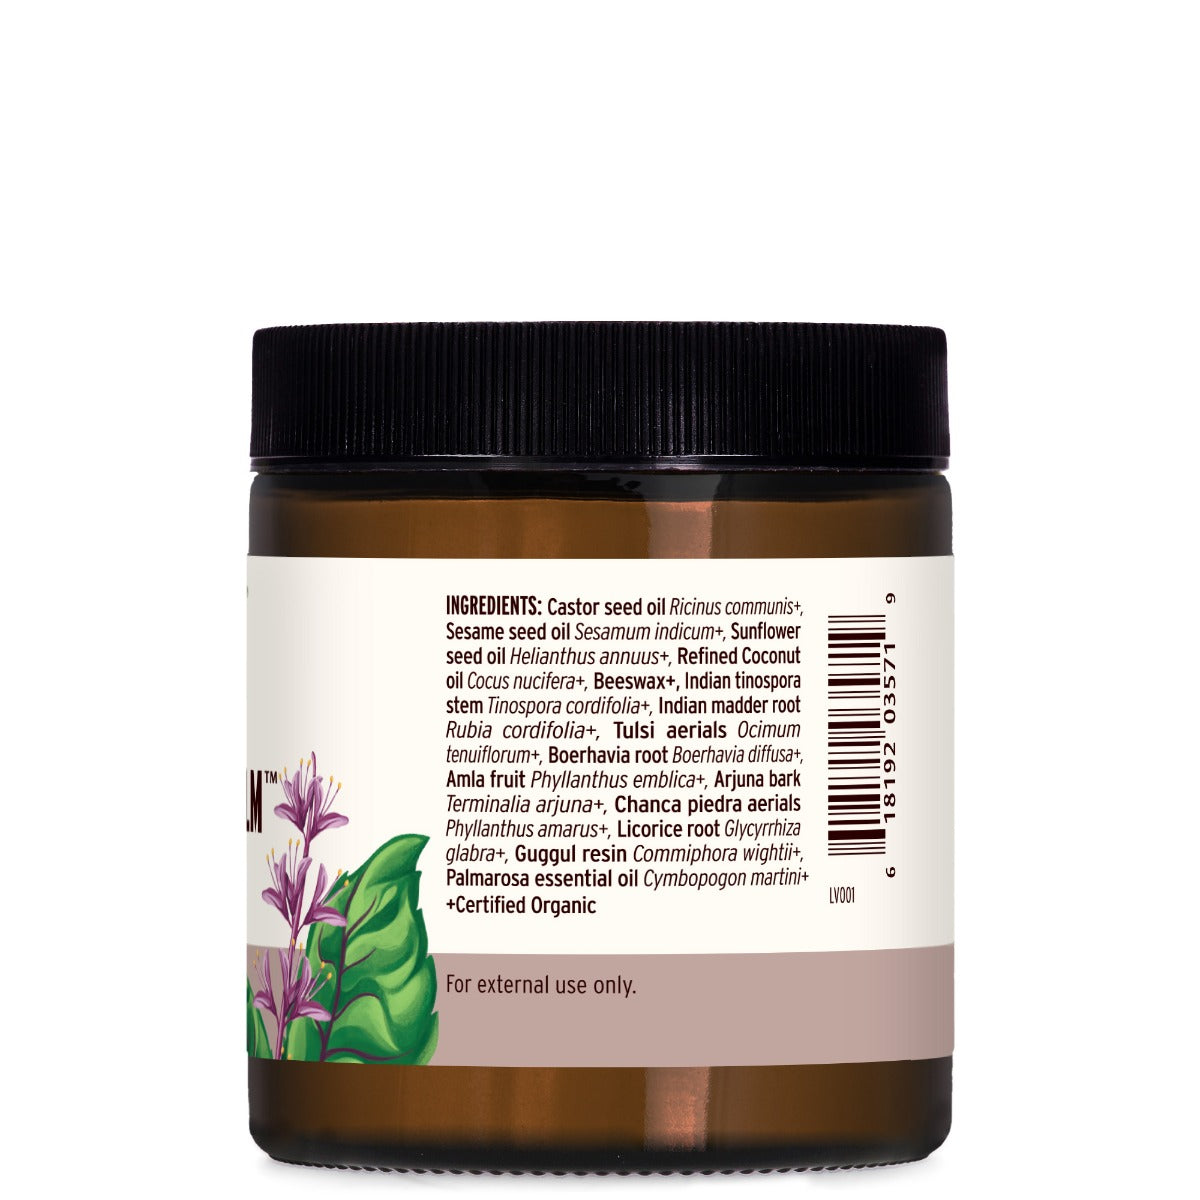 Breast Care Balm Ingredients